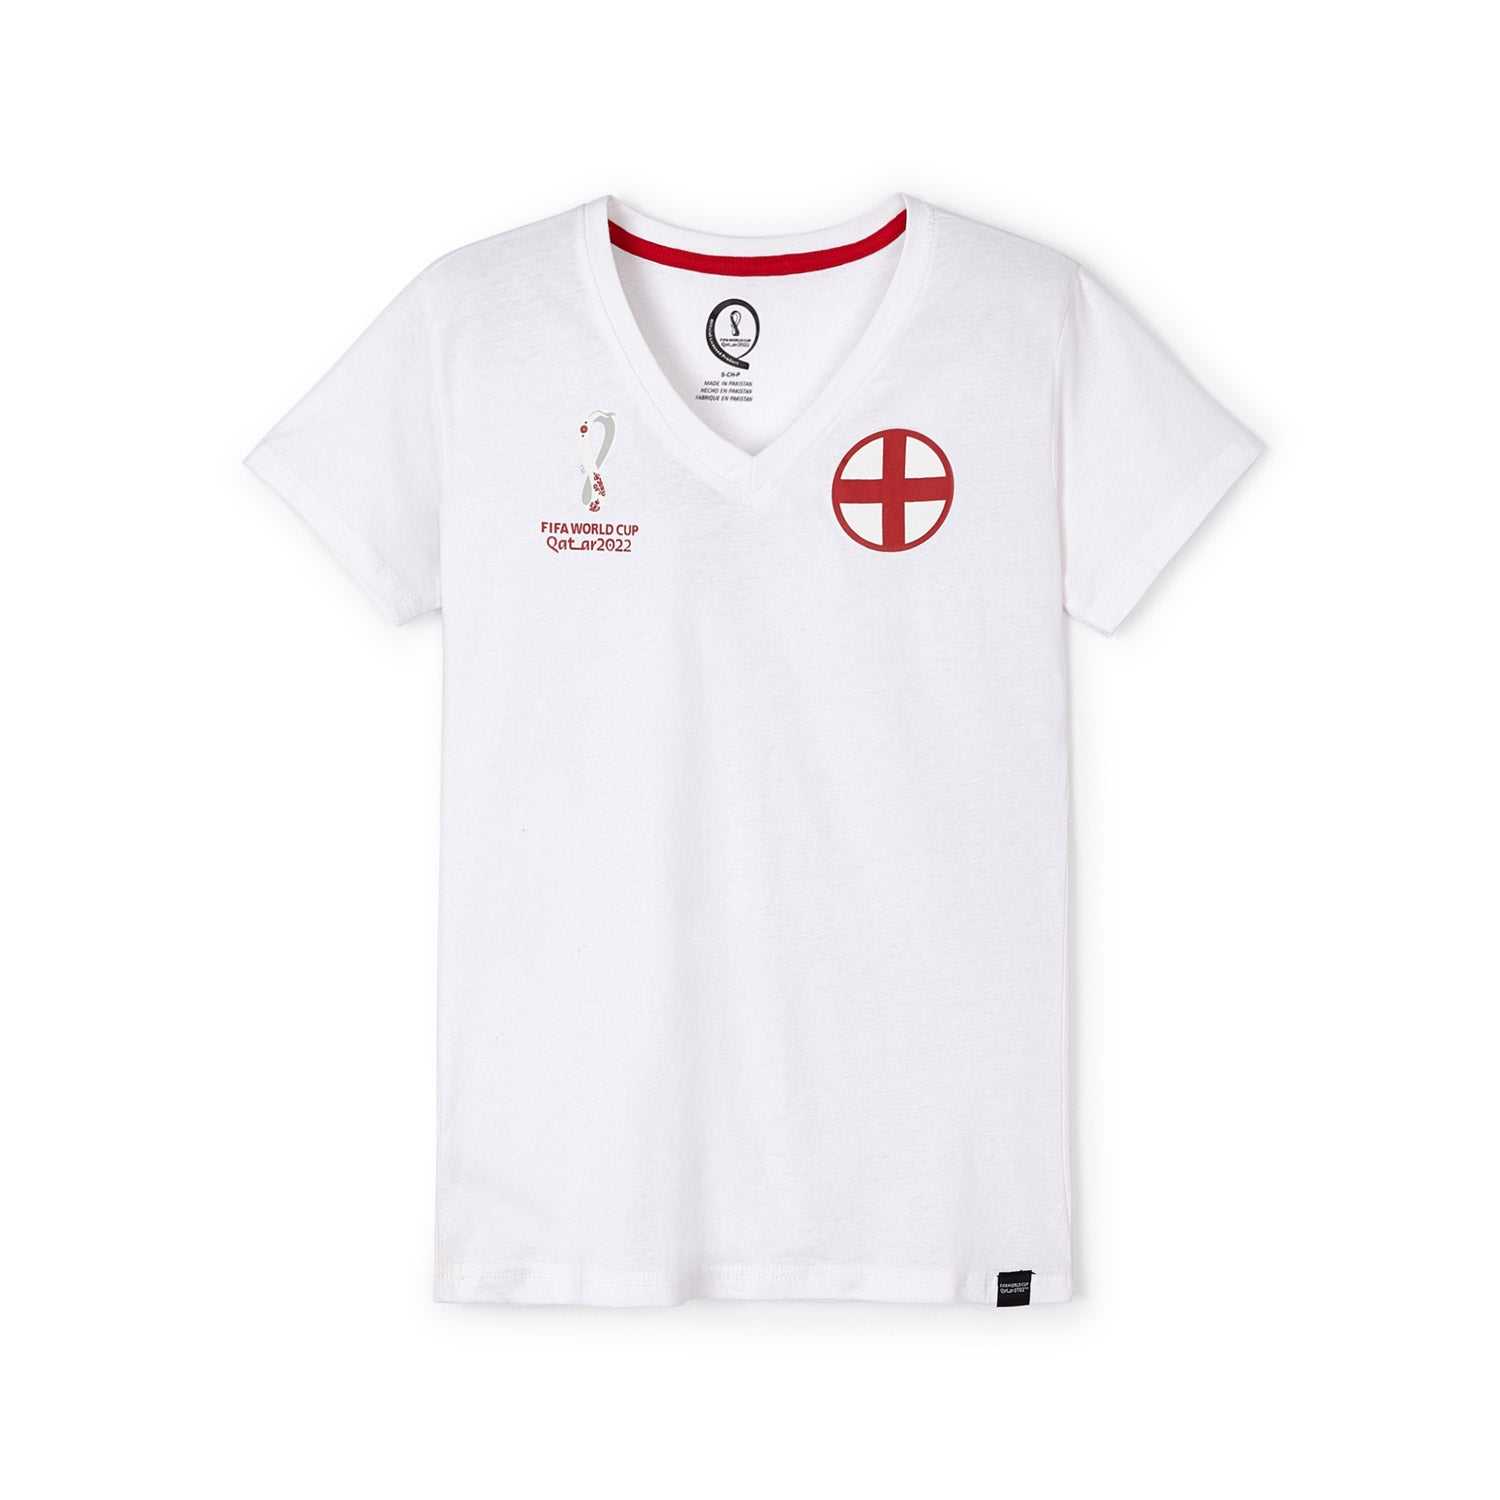 2022 World Cup England White T-Shirt - Womens